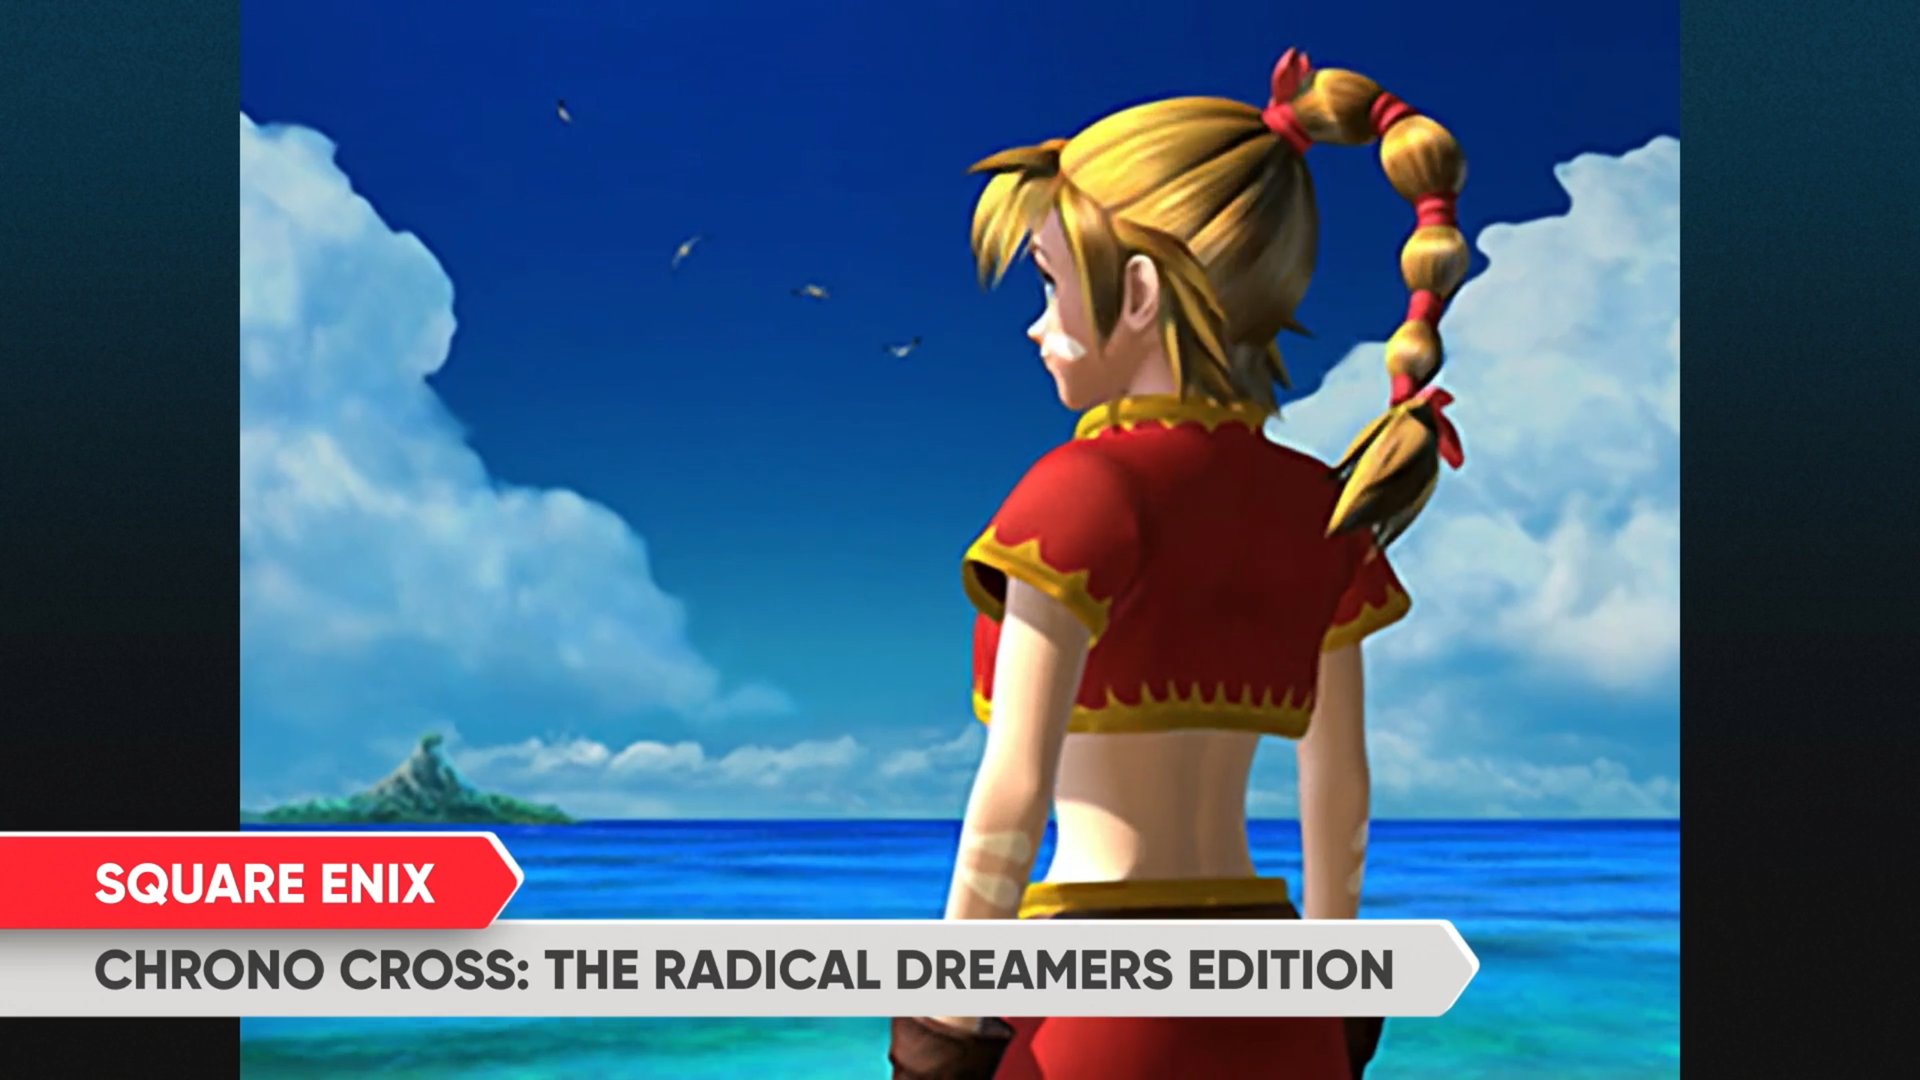  Chrono Cross: The Radical Dreamers Edition - Nintendo Switch :  Video Games